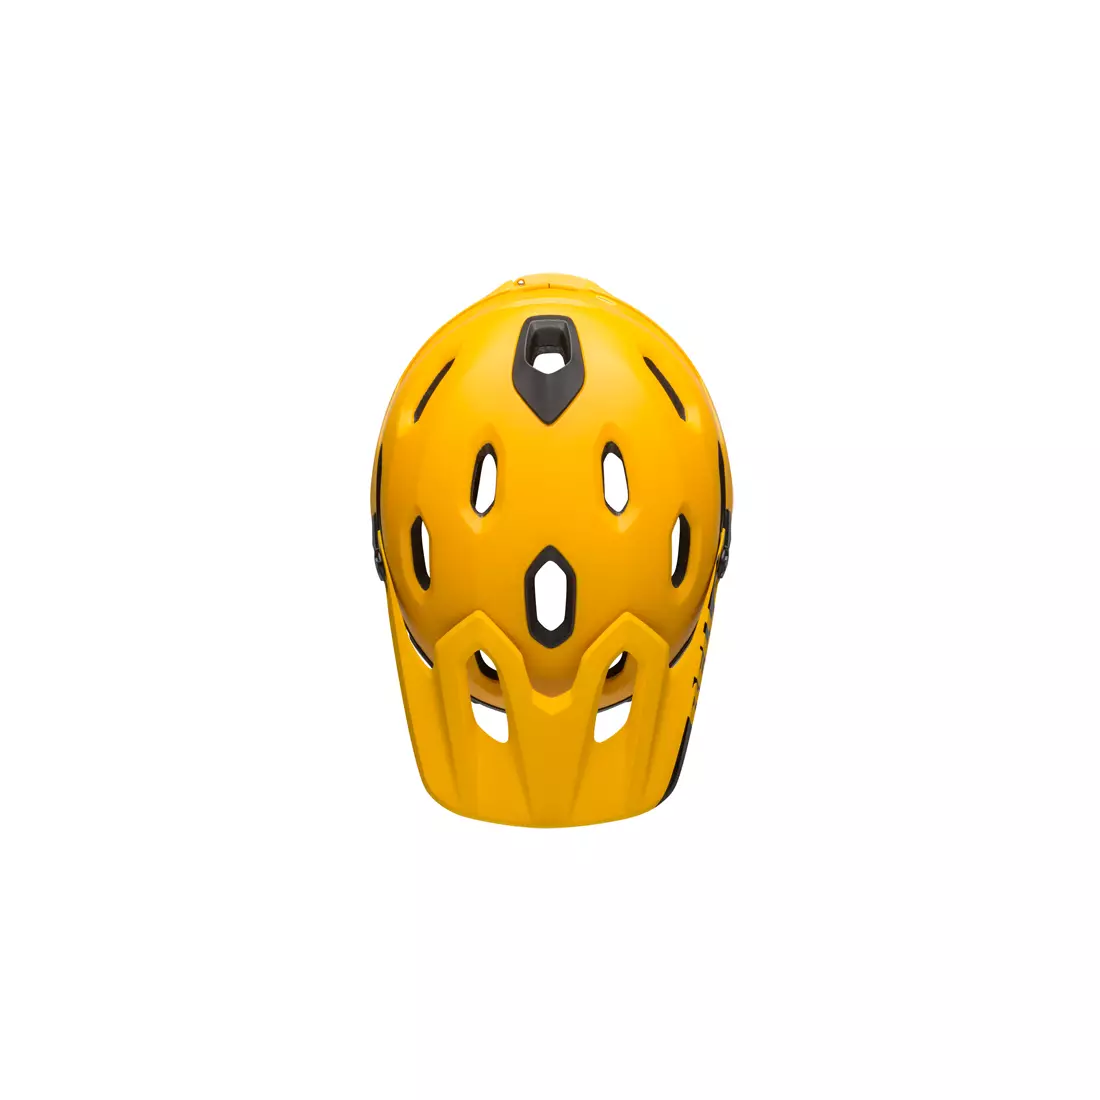 BELL SUPER DH MIPS SPHERICAL full face bicycle helmet, matte gloss yellow black